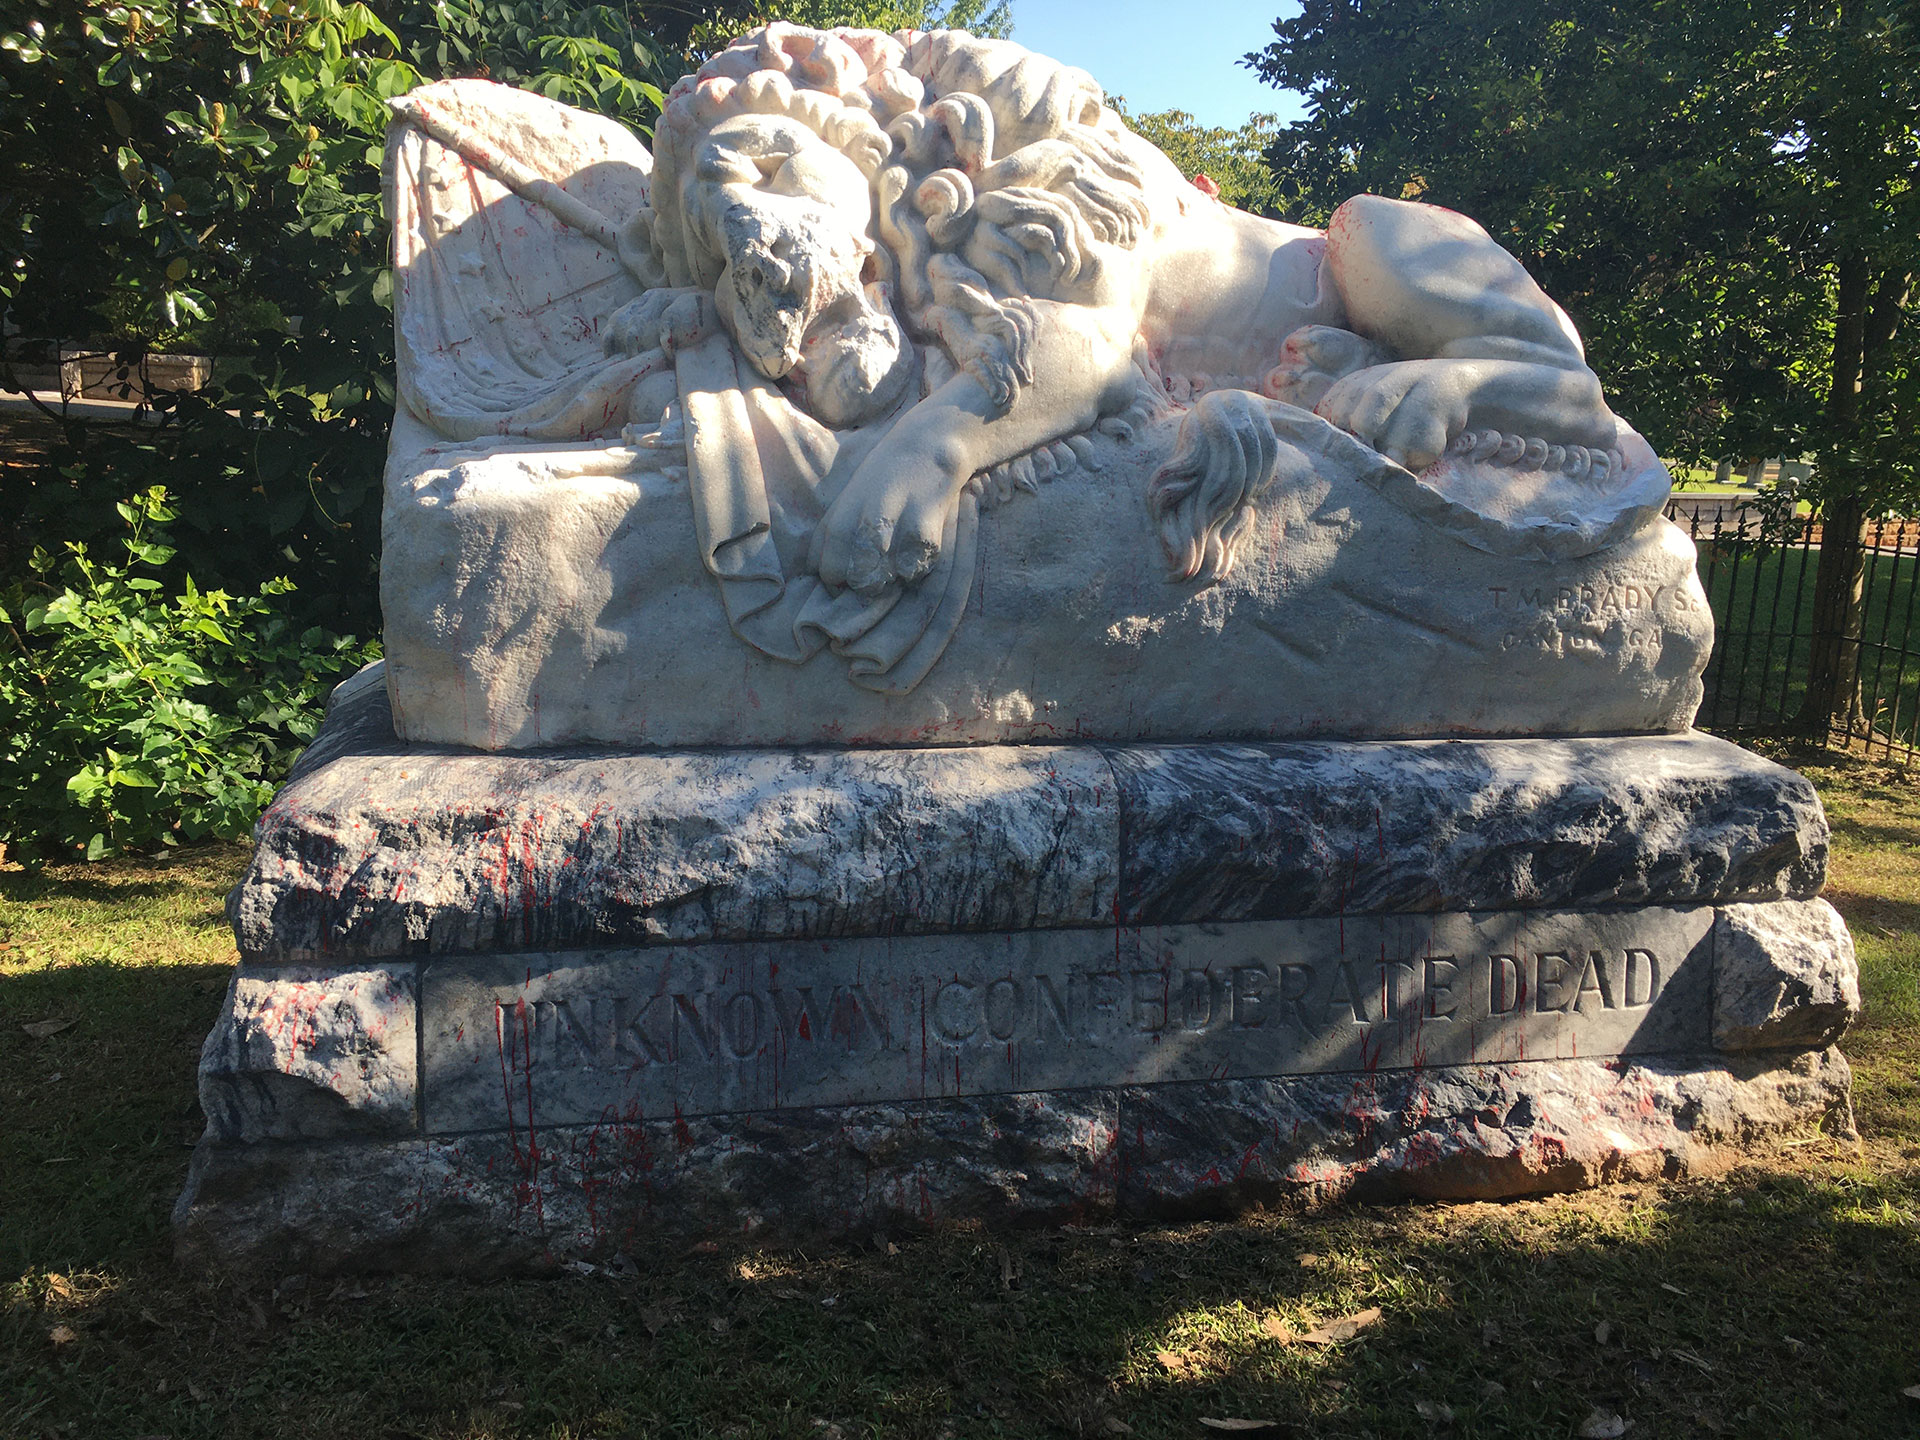 Shortly before its removal, the Lion of Atlanta showing signs of vandalism: a chipped nose and red paint.